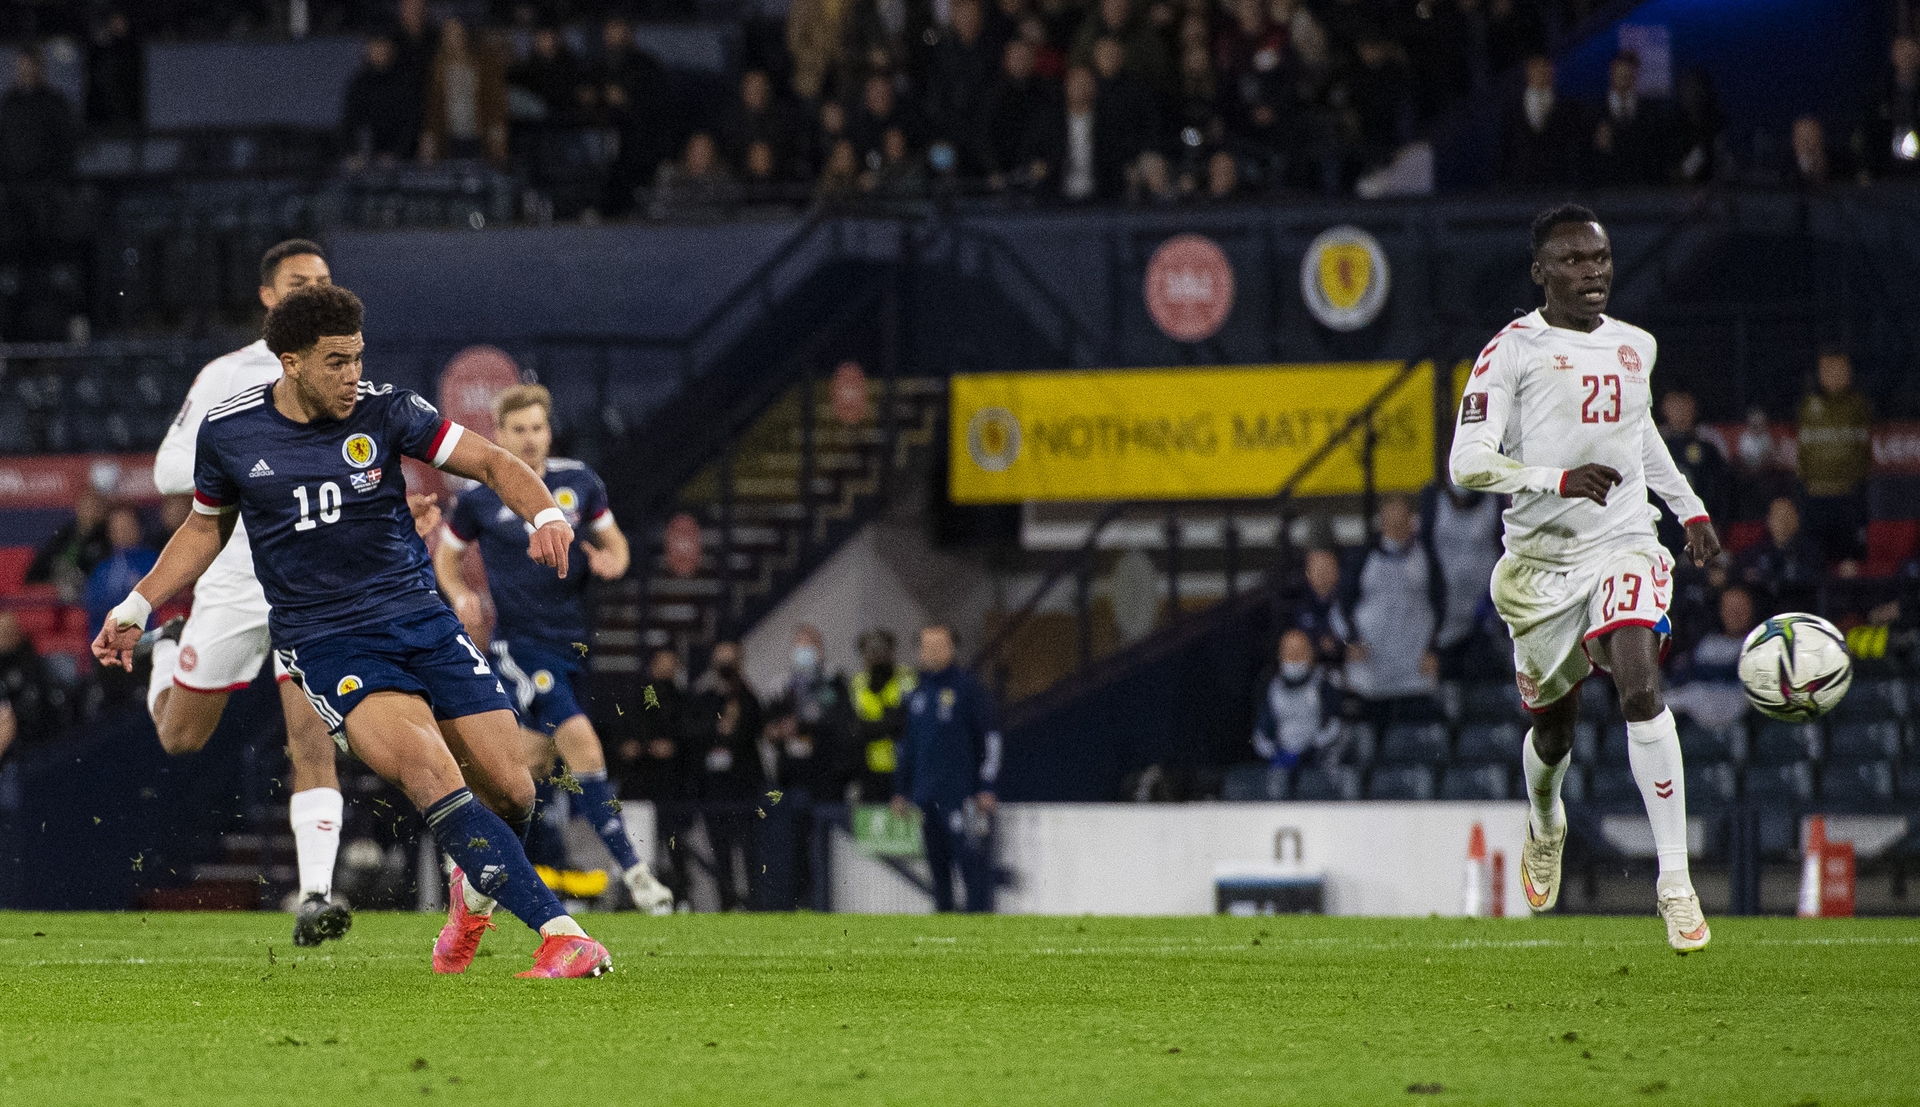 <strong>Che Adams sealed a sensational night for Scotland by racing clean through with five minutes to go before curling the ball beyond Kasper Schmeichel. </strong>”/><span
class=